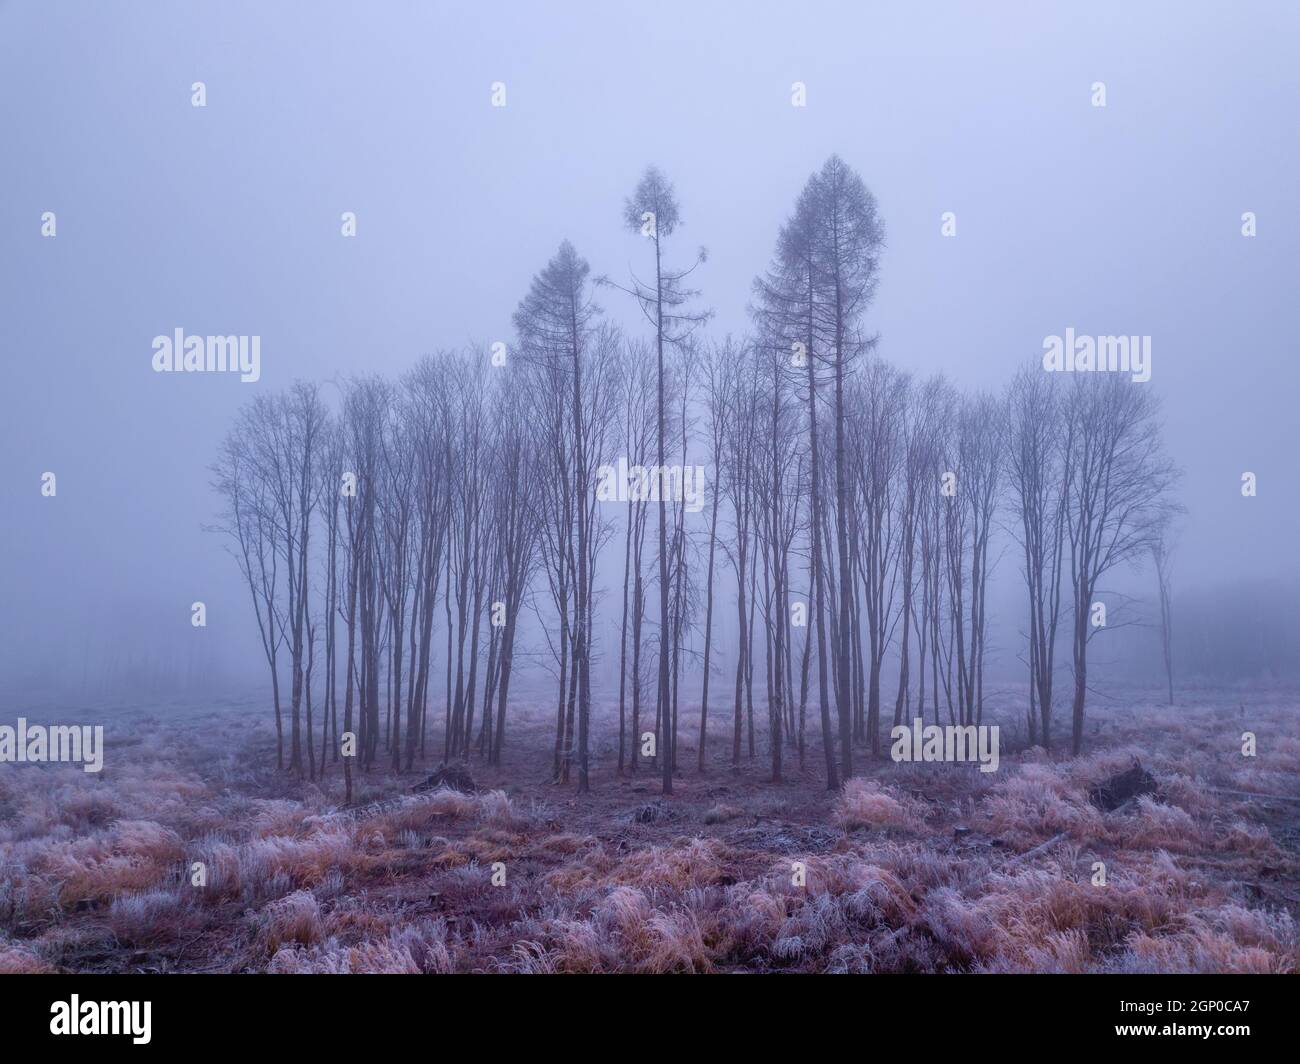 last alone trees in deforested landscape after bark beetle attack, mystical winter theme. Czech Republic, Vysocina region highland Stock Photo